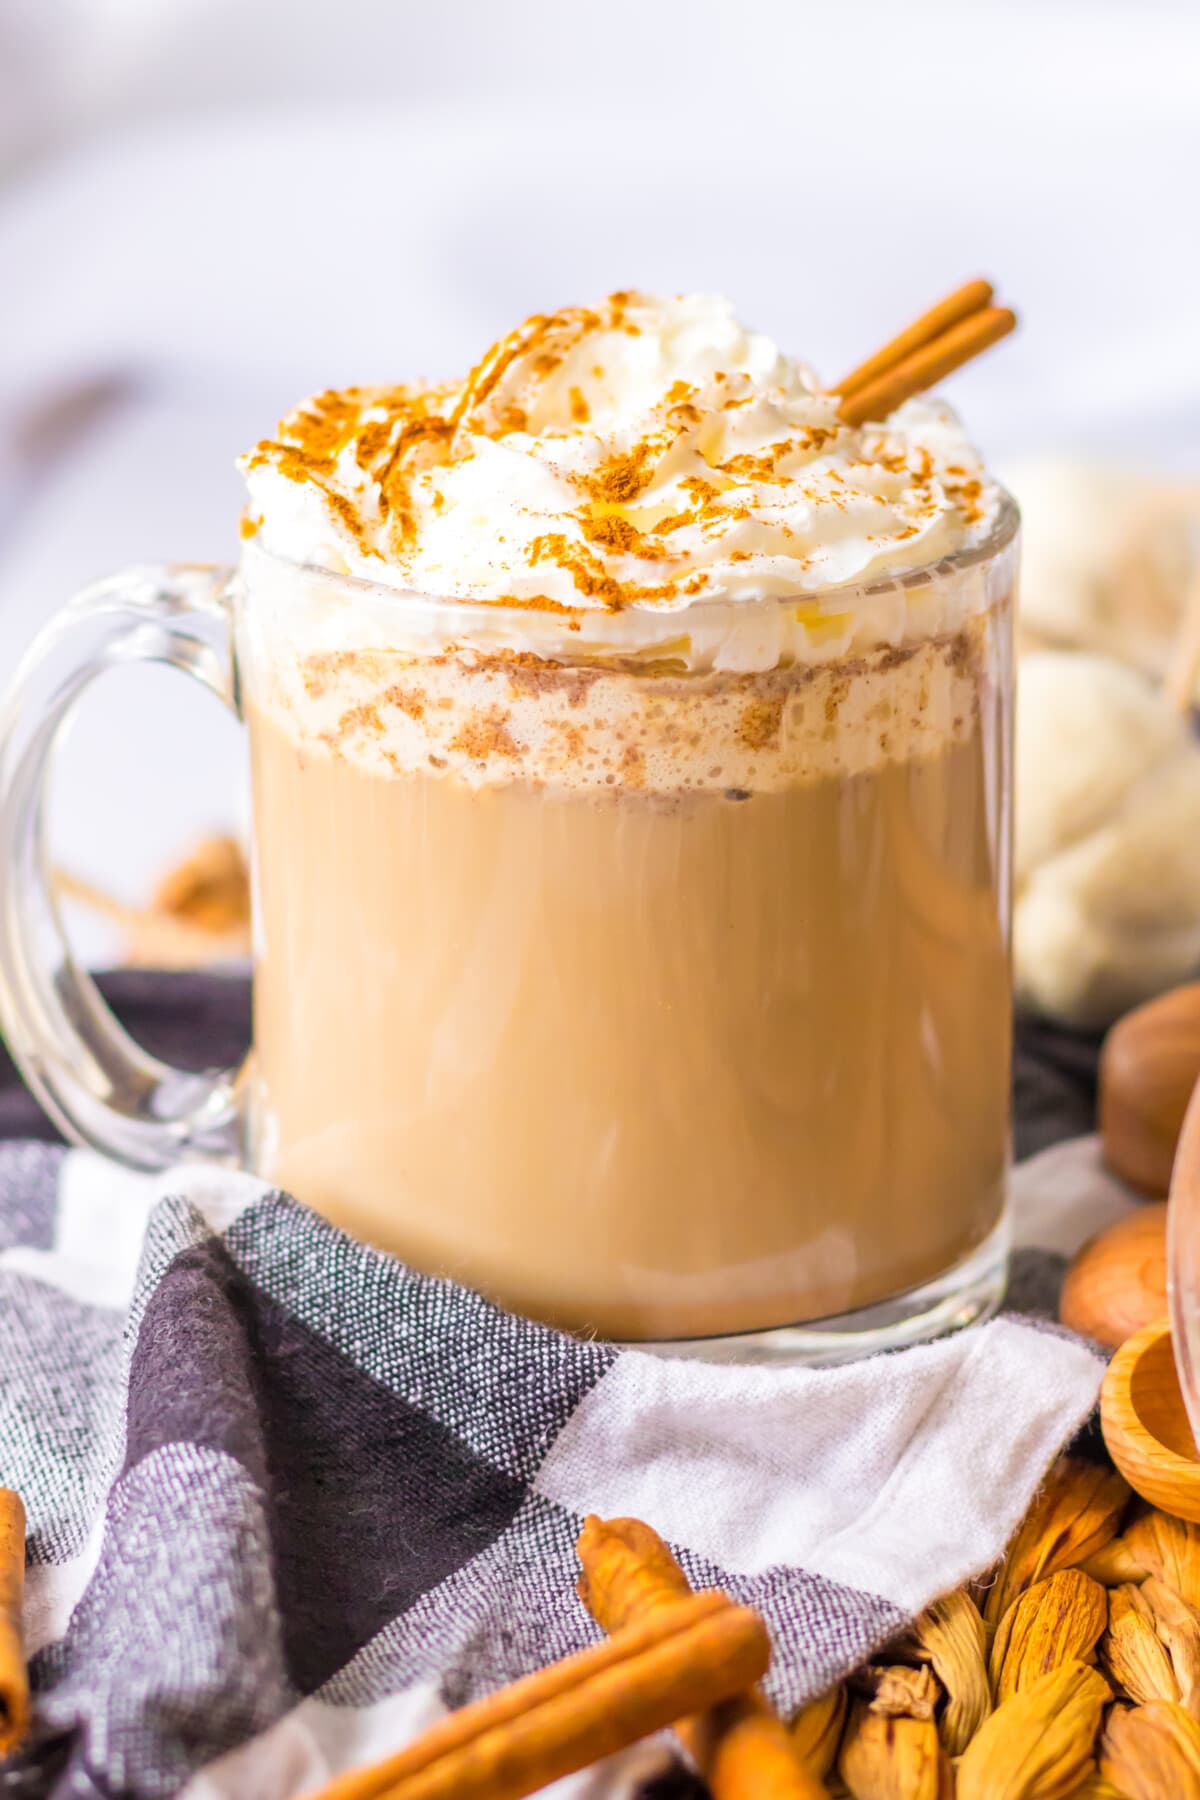 Slow Cooker Pumpkin Spice Latte topped with cinnamon sticks.